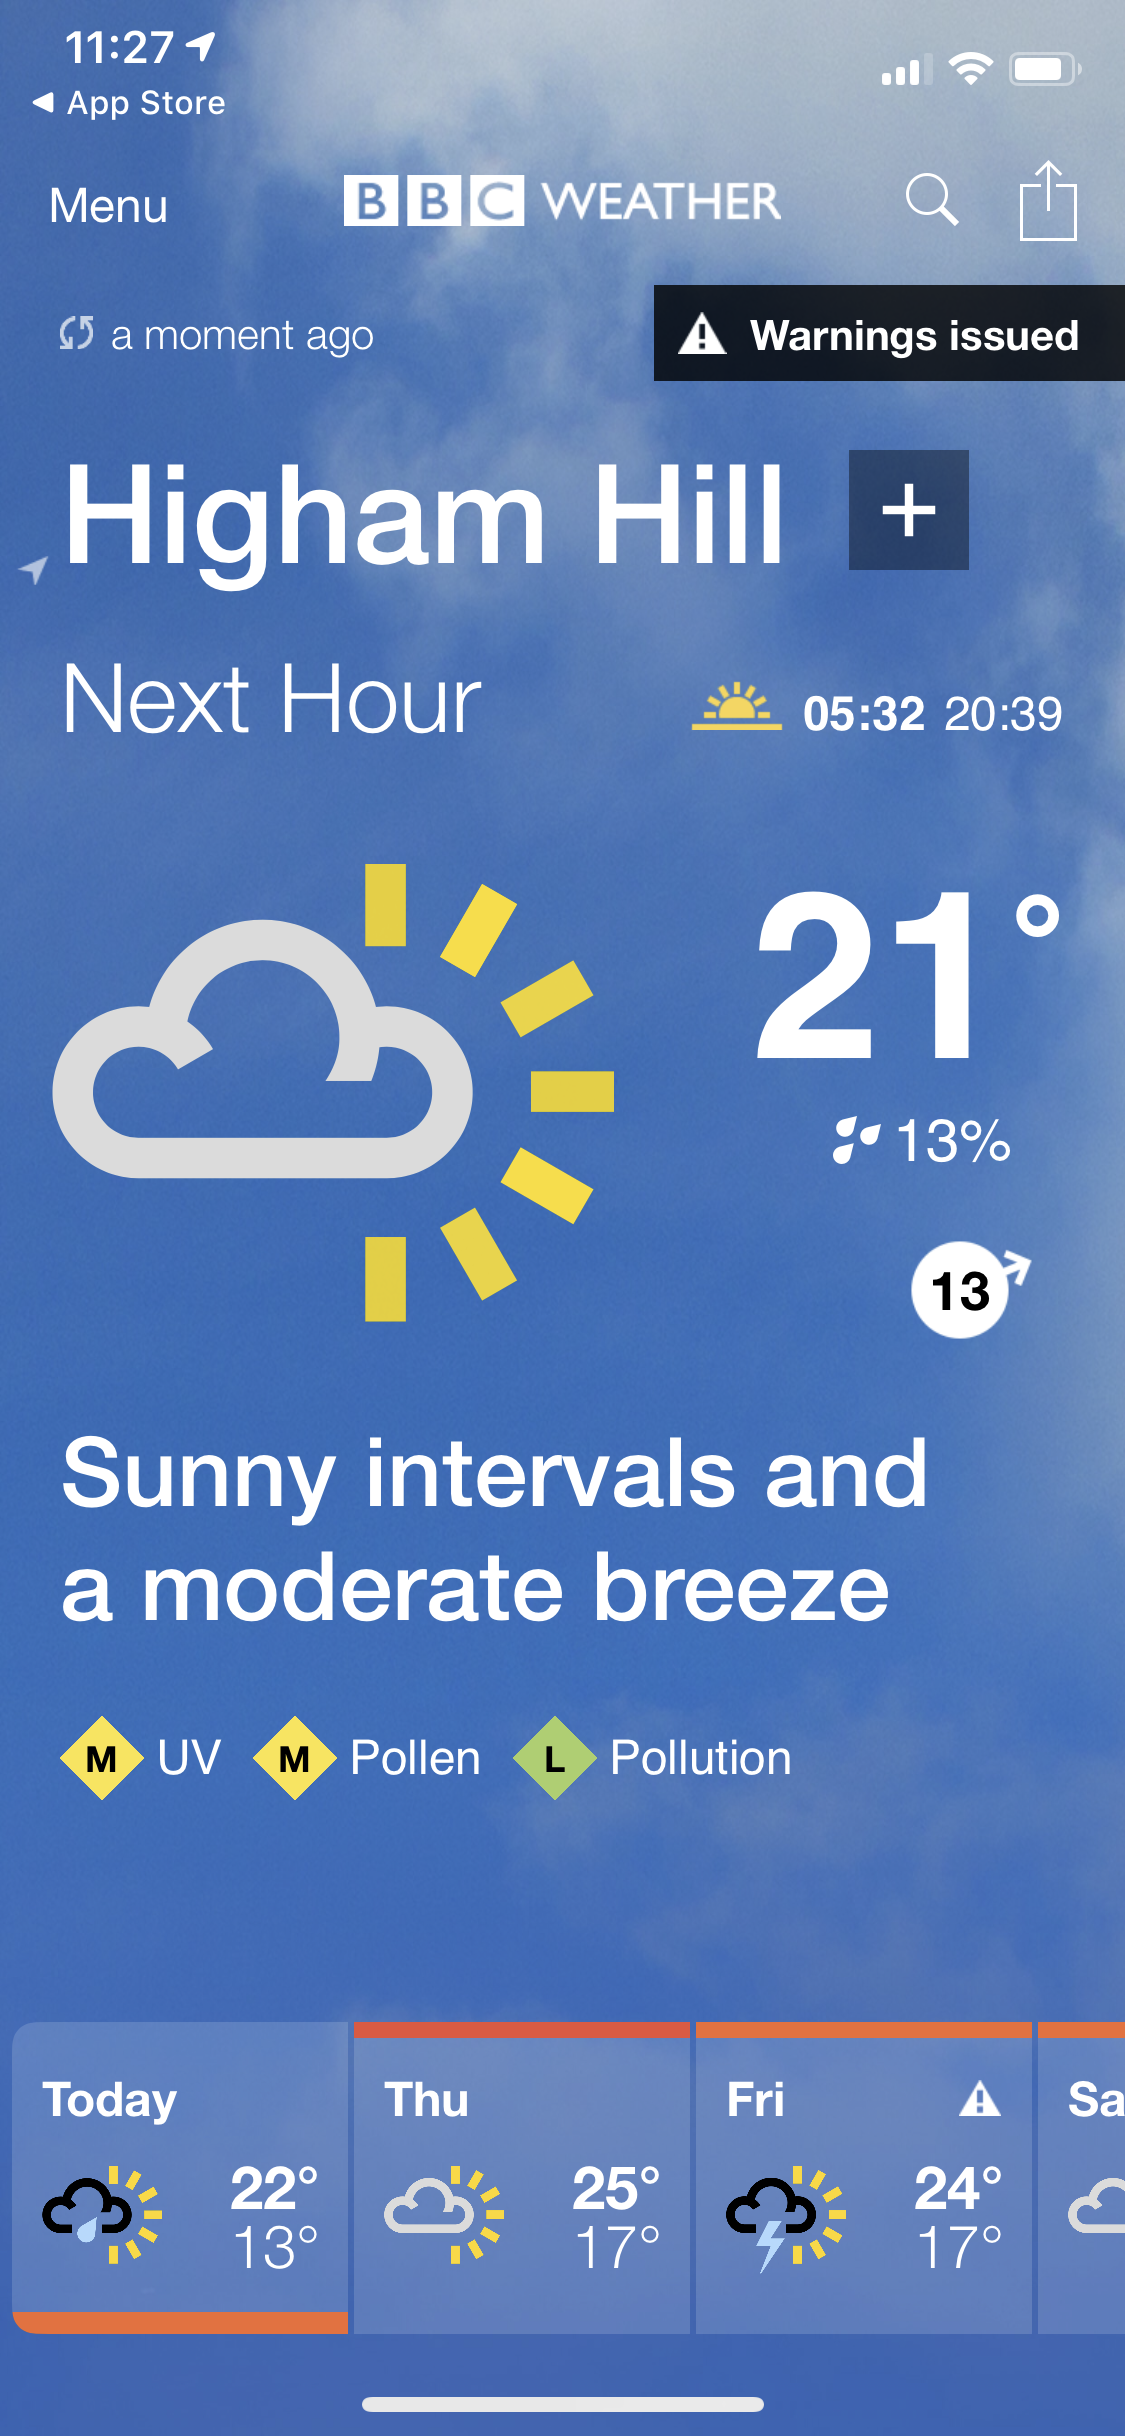 Bbc weather app for android